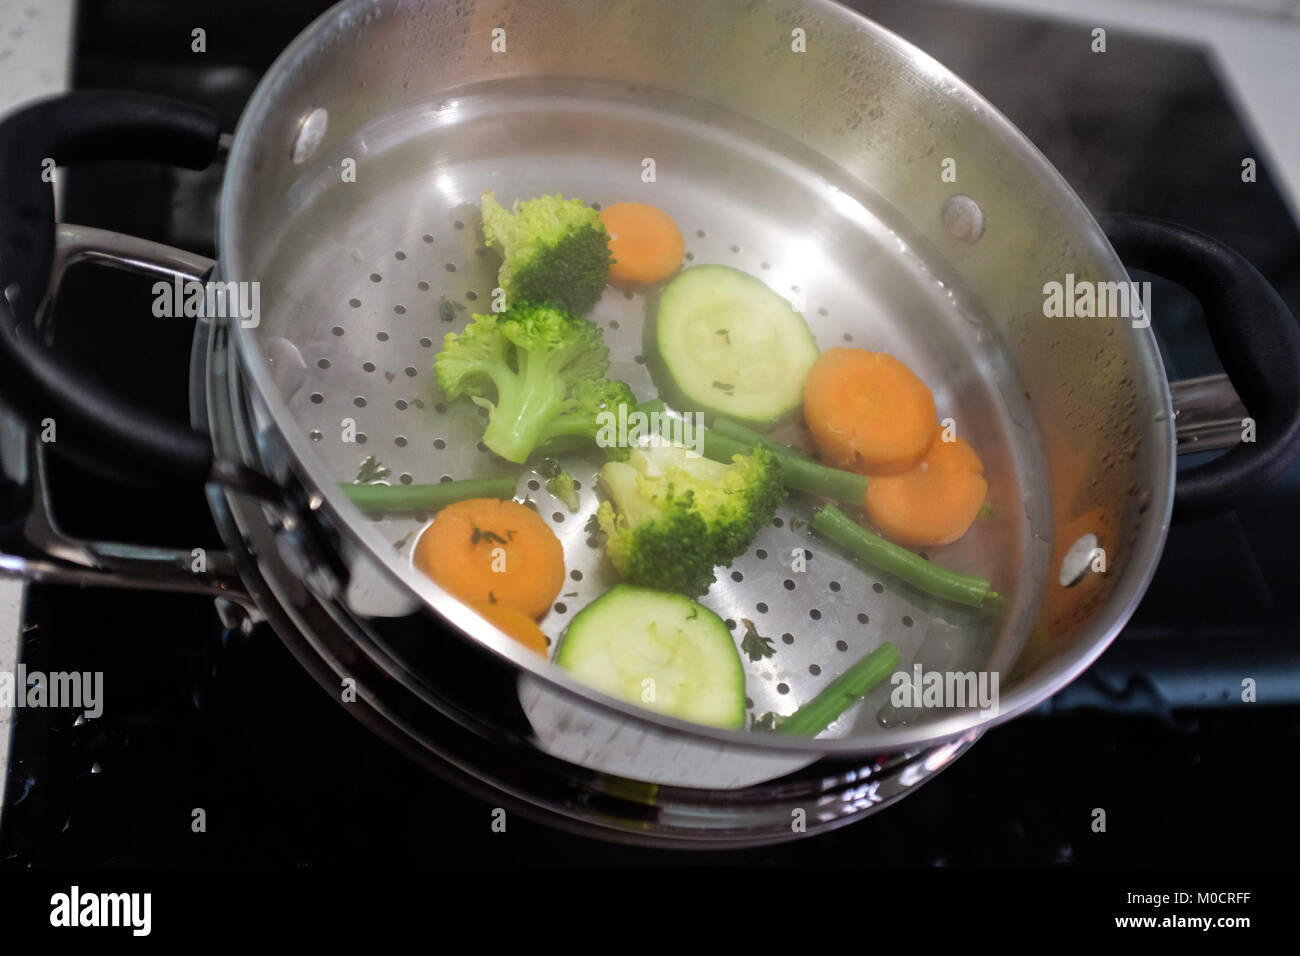 Healthy cooking steamed vegetables of cauliflower , broccoli and courgette Stock Photo